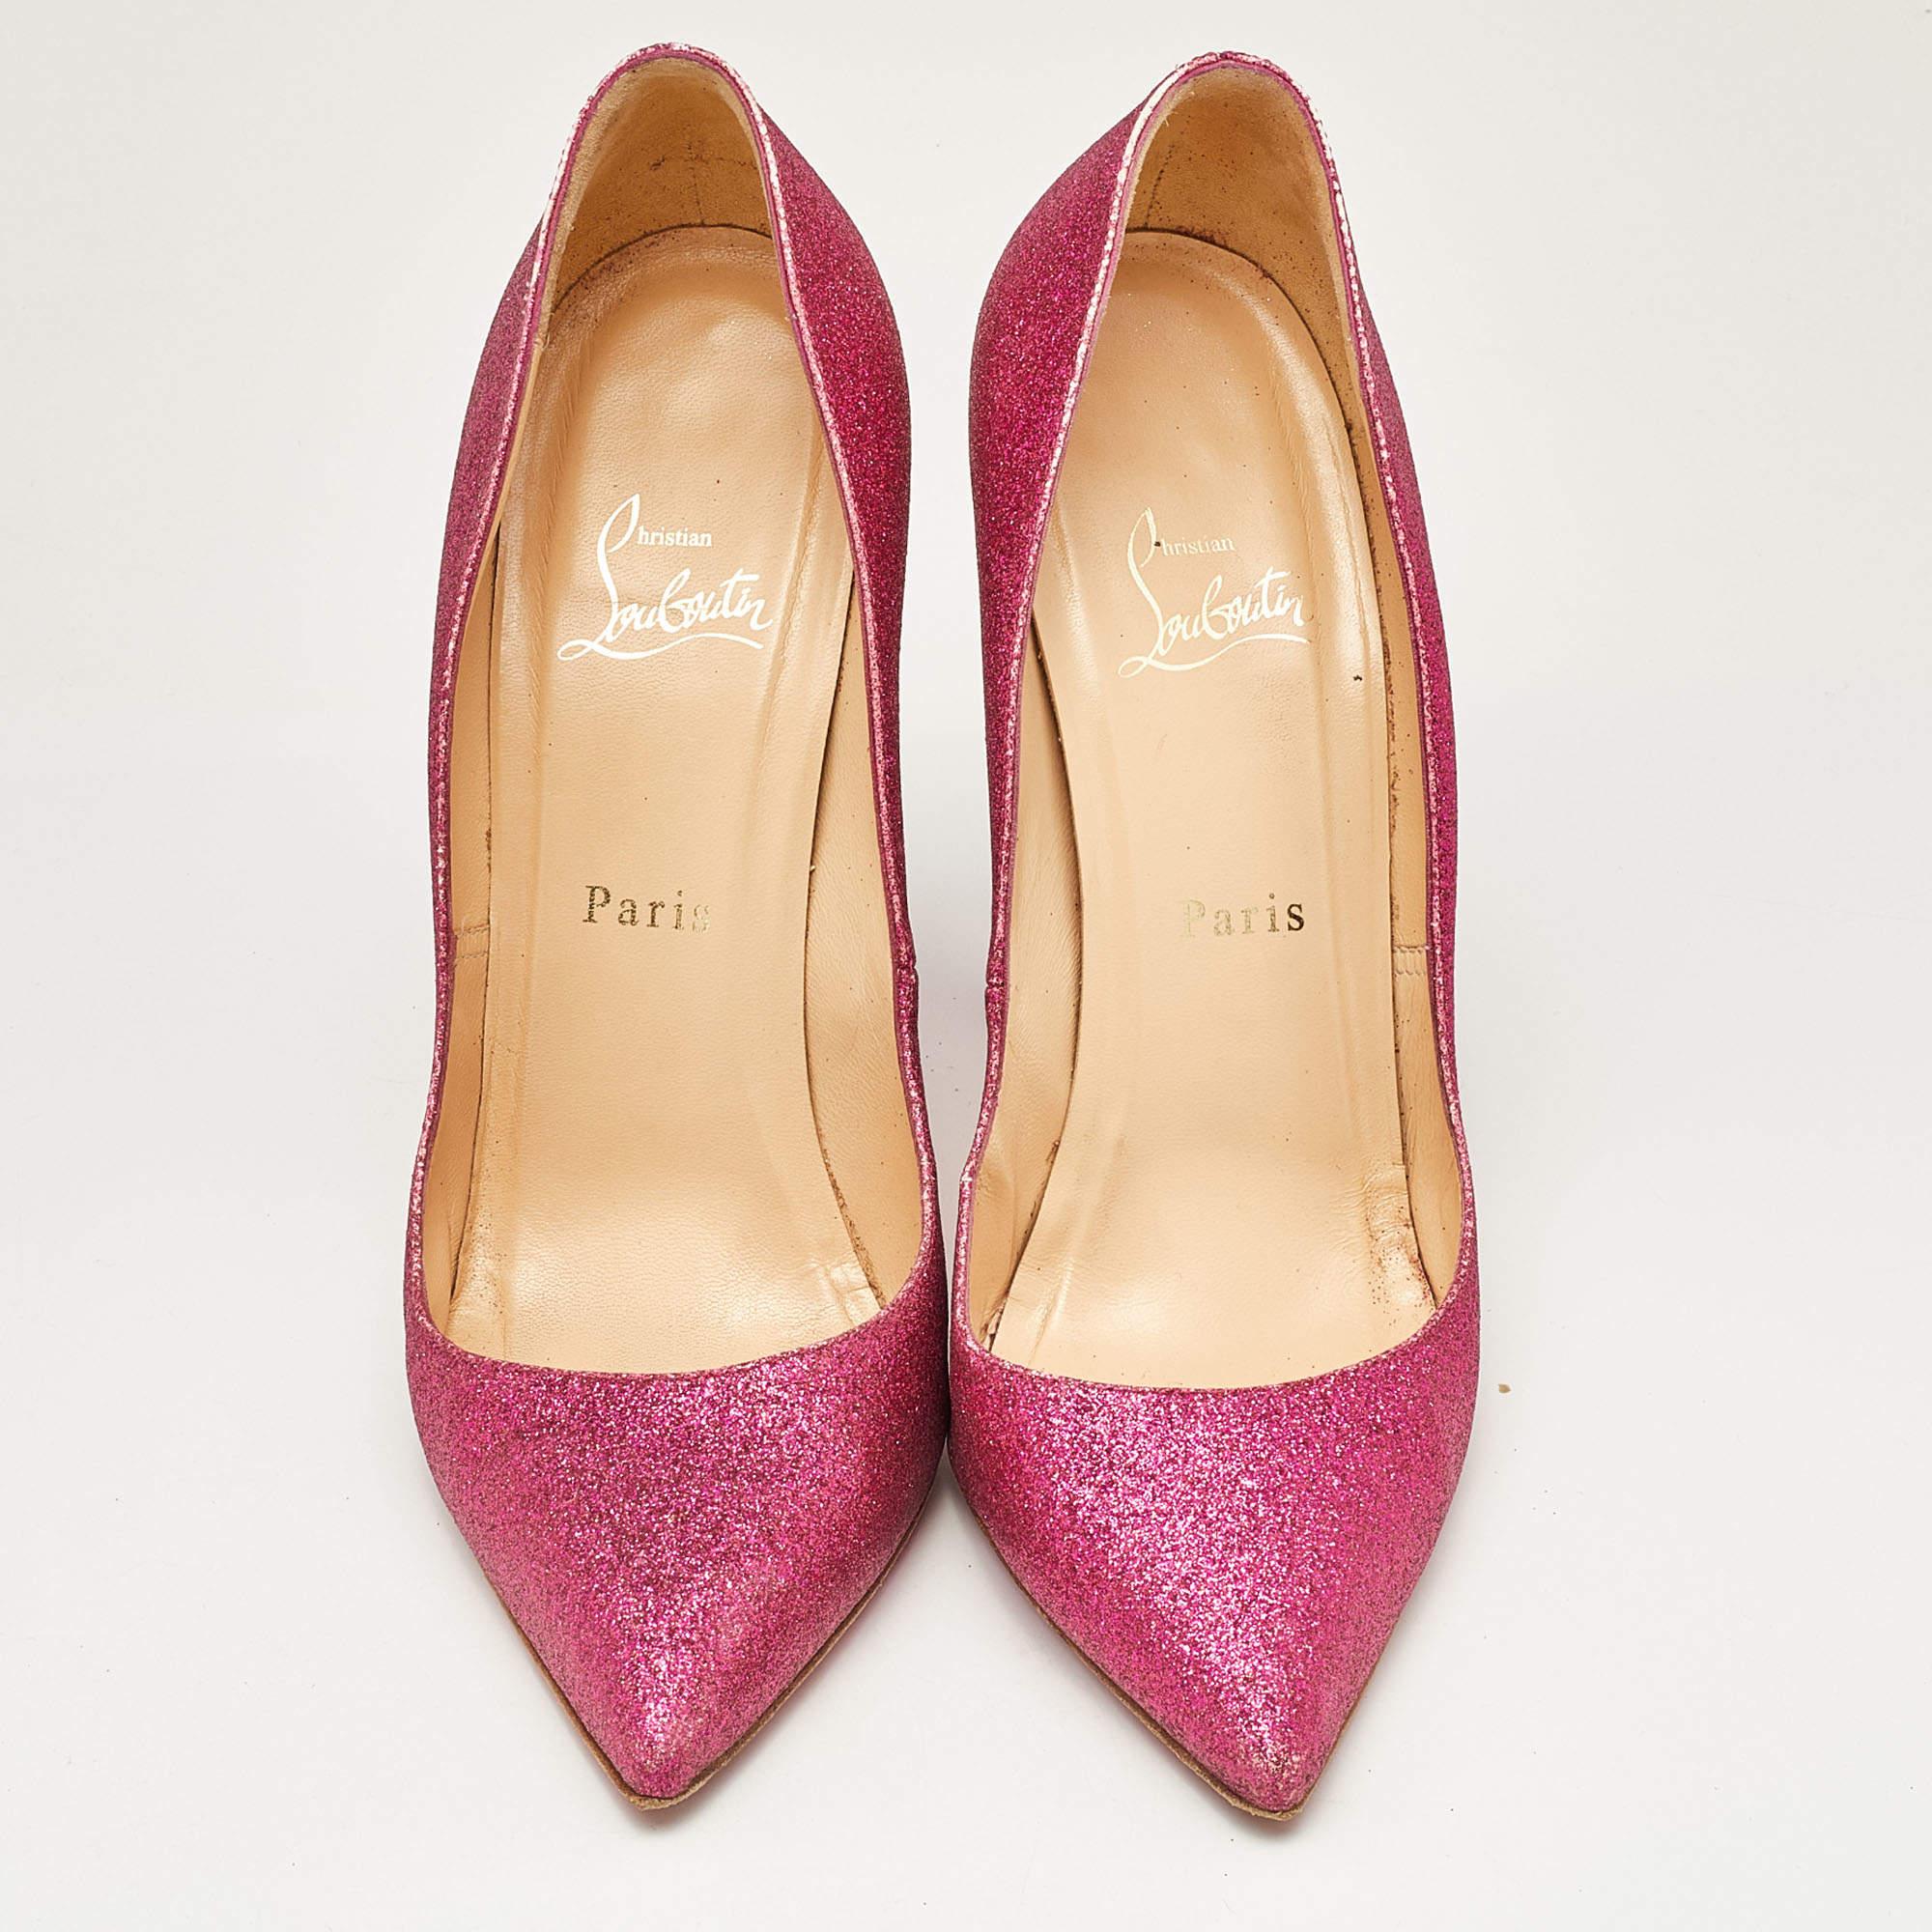 The classic pointed toes and signature red-lacquered sole characterize this pair of Christian Louboutin pumps. Crafted from glitter, it has been styled in a pink shade and a leather insole. The sleek heels and durable construction signify the